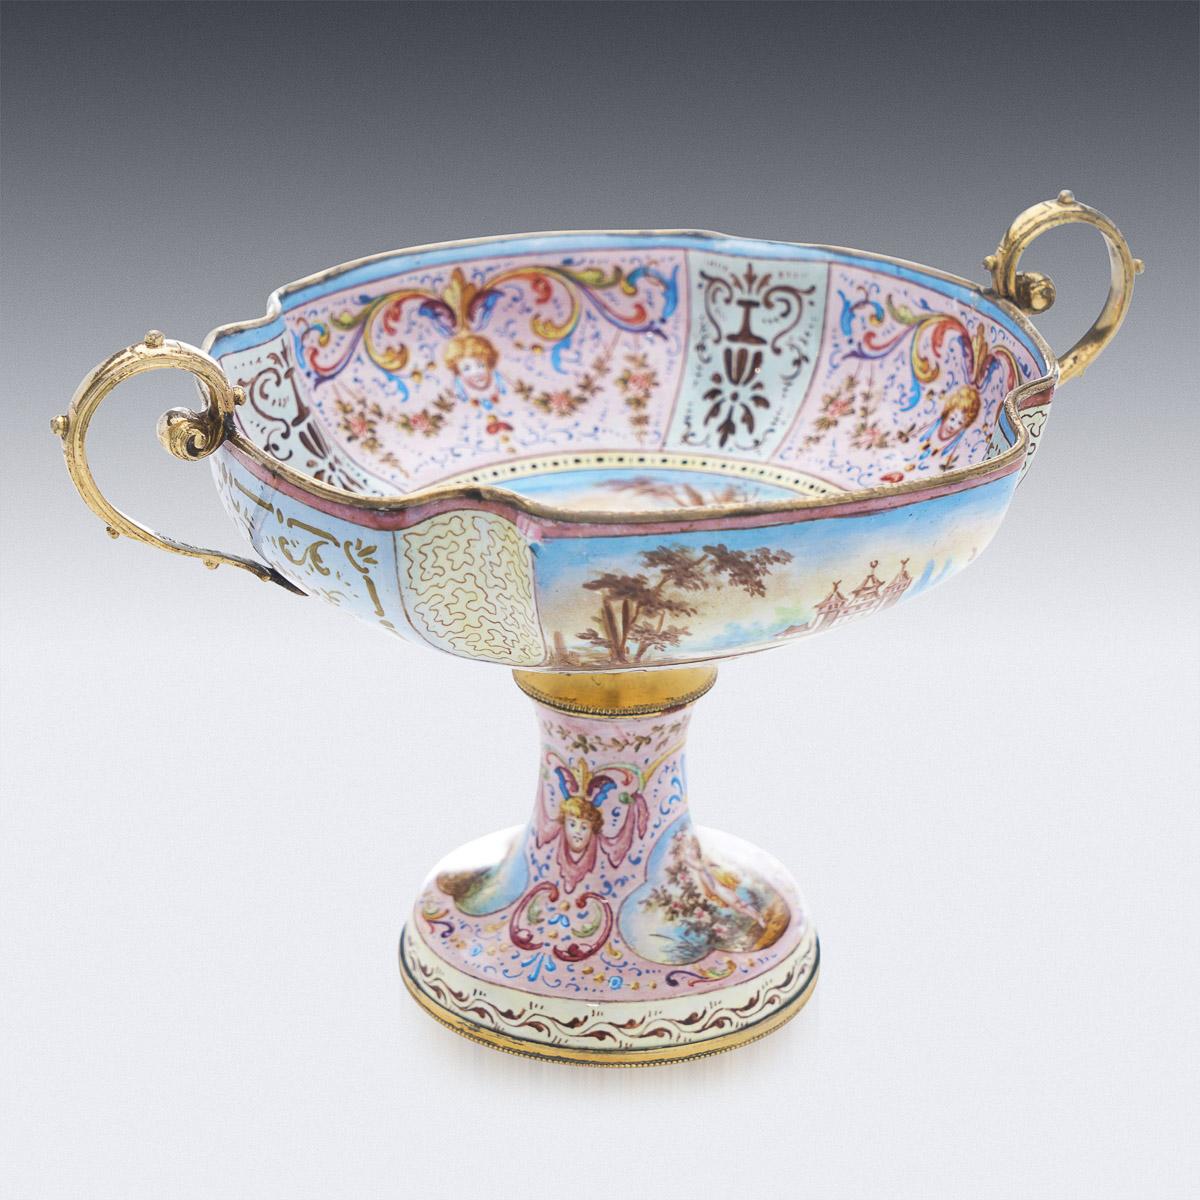 Antique 19th Century Austrian Renaissance revival solid silver enameled comport, the body supported by spreading domed foot, beautifully enamelled with a multicolored foliage decoration around oval reserves dipicting various romatic scenes, the main